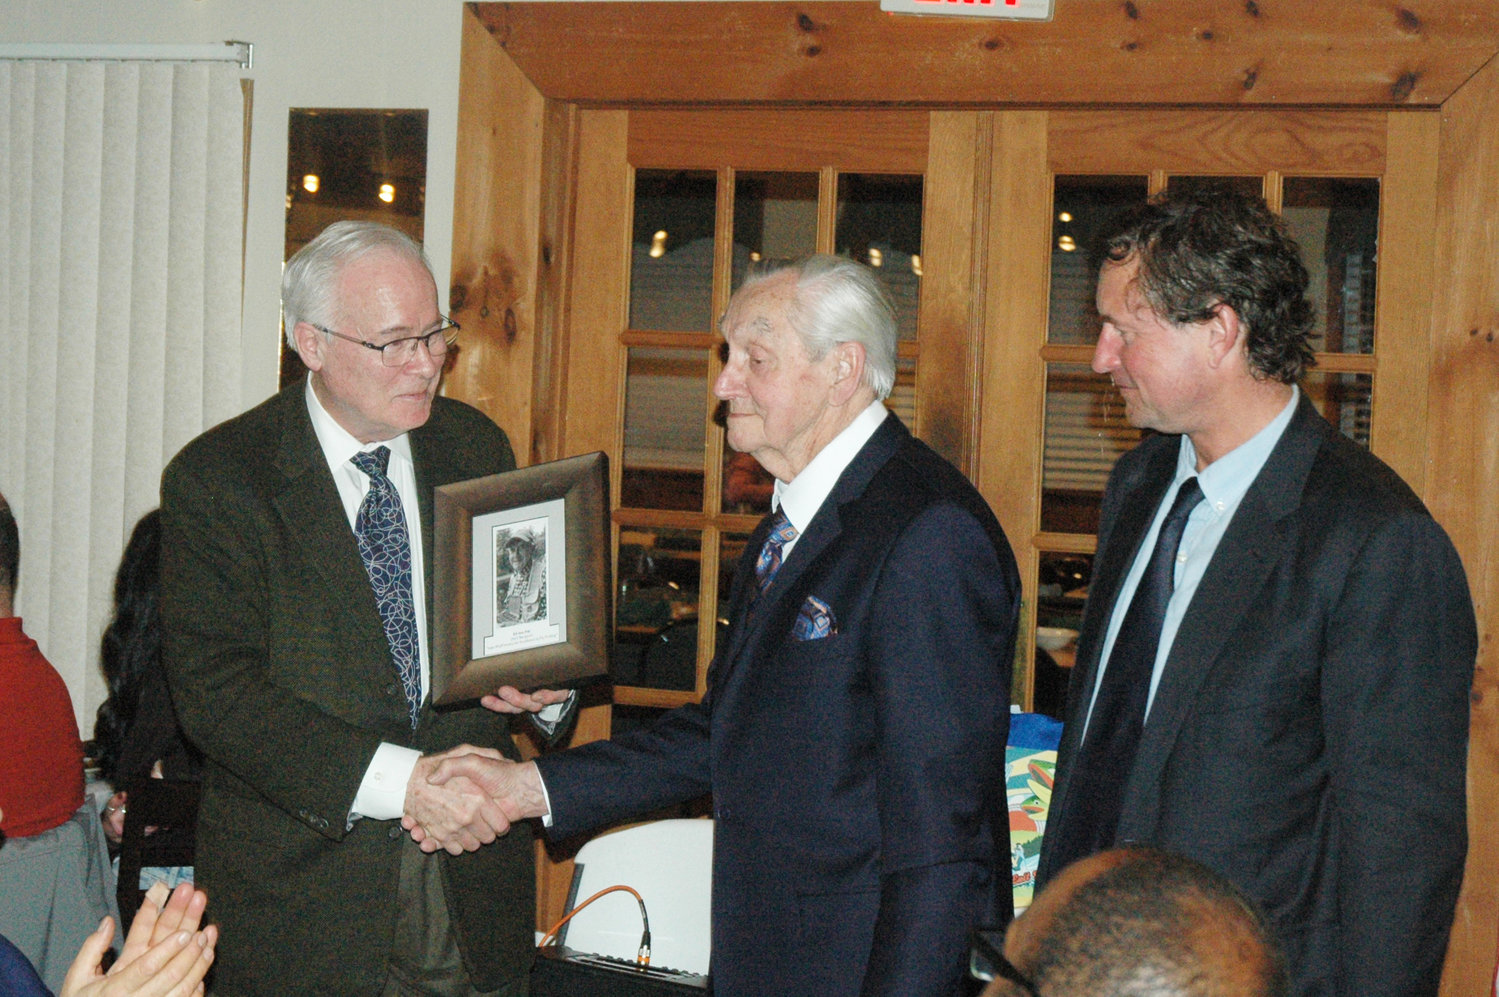 Ed Van Put accepts first ever “Joan Wulff Award for Fly Fishing Excellence” at 62nd Annual Two Headed Trout Dinner. From left to right, Richard Schager, Ed Van Put and Ramsay Adams.